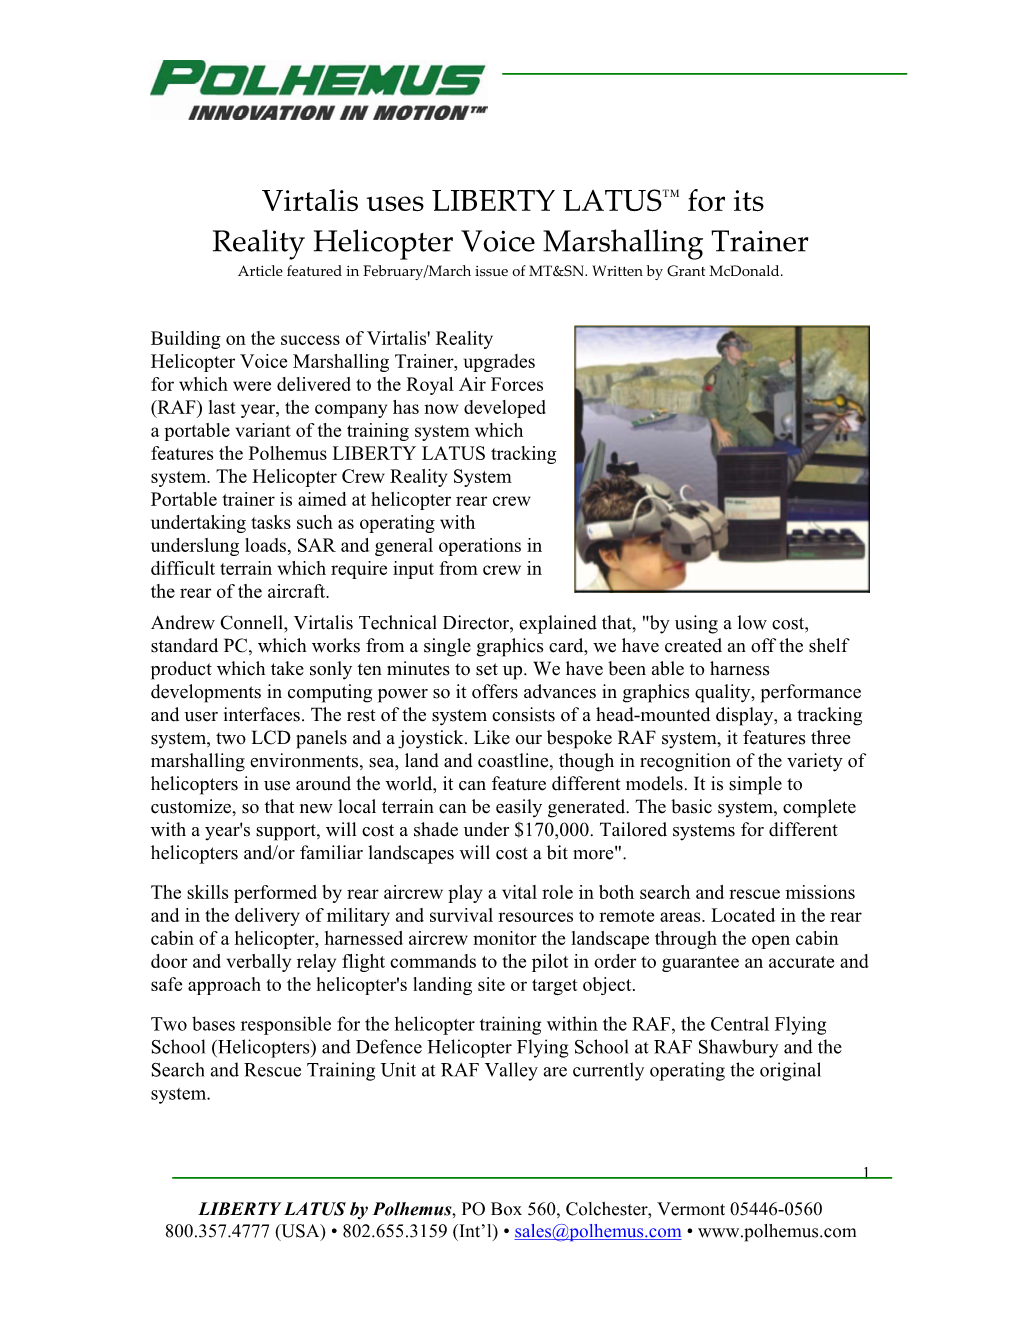 Virtalis Uses LIBERTY LATUS™ for Its Reality Helicopter Voice Marshalling Trainer Article Featured in February/March Issue of MT&SN